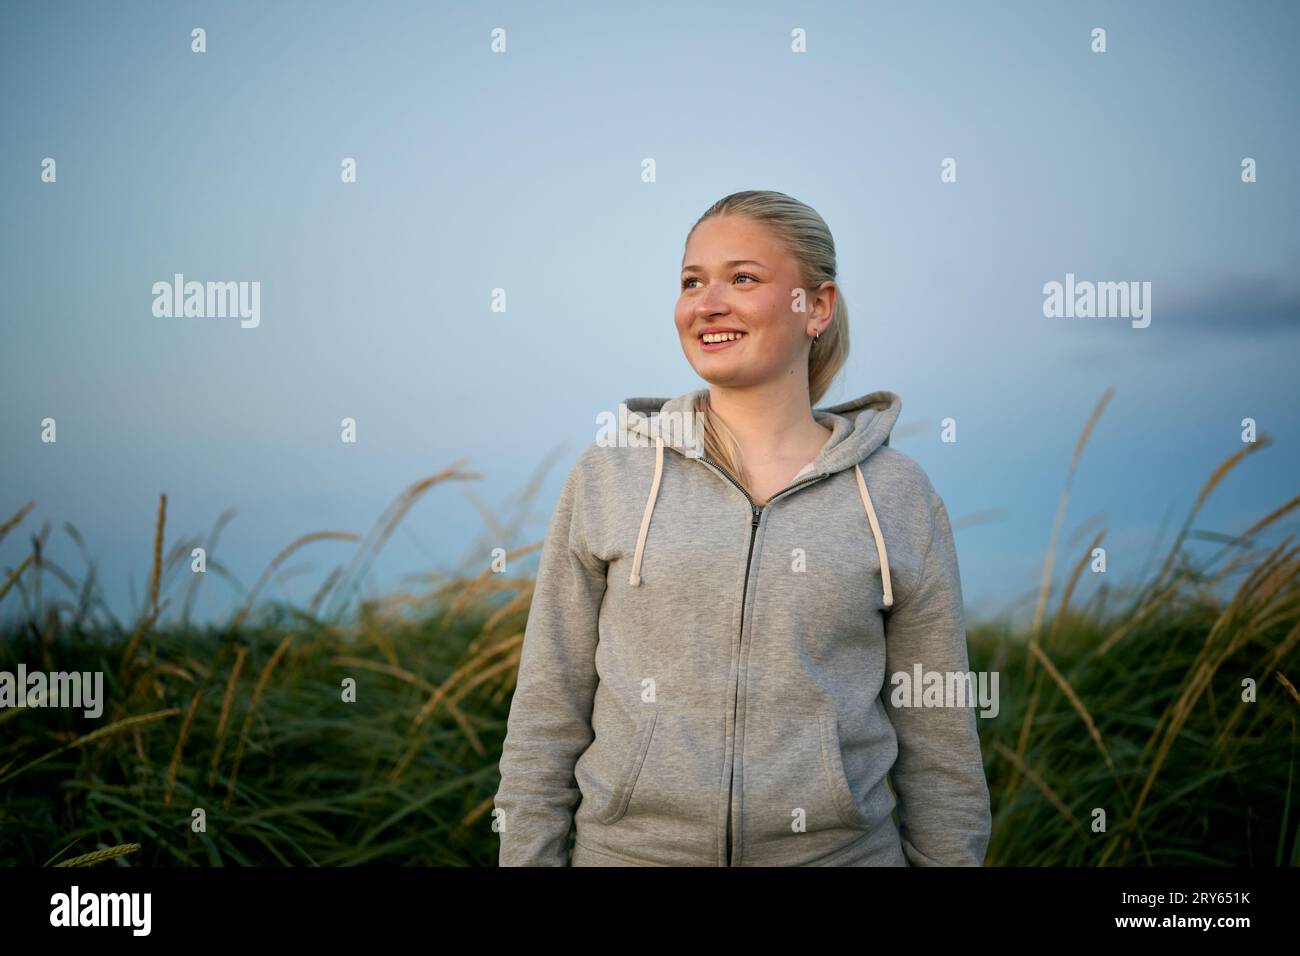 Smiling woman standing against agricultural field and admiring nature Stock Photo